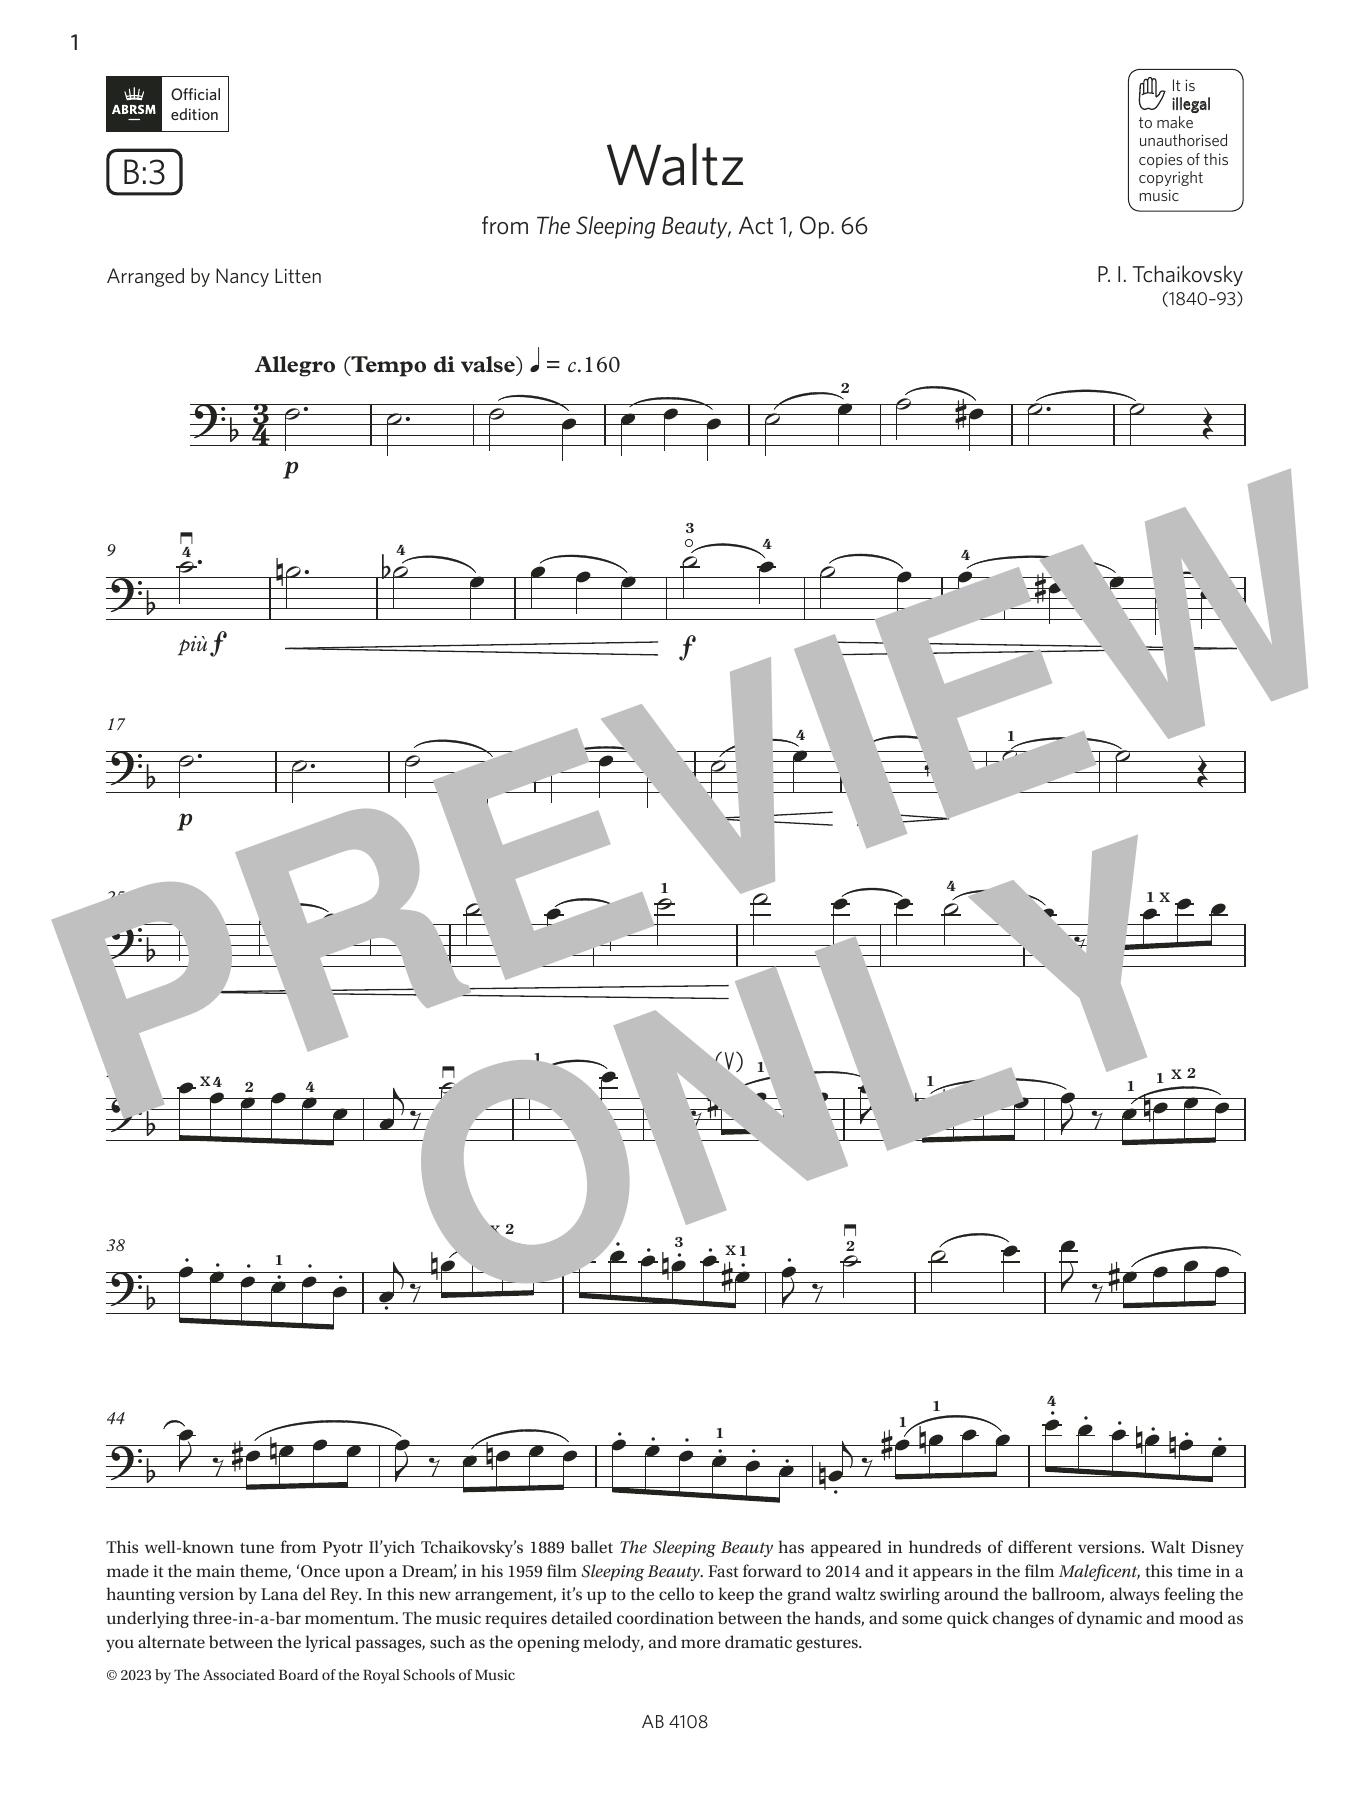 Download Pyotr Il'yich Tchaikovsky Waltz (Grade 5, B3, from the ABRSM Cell Sheet Music